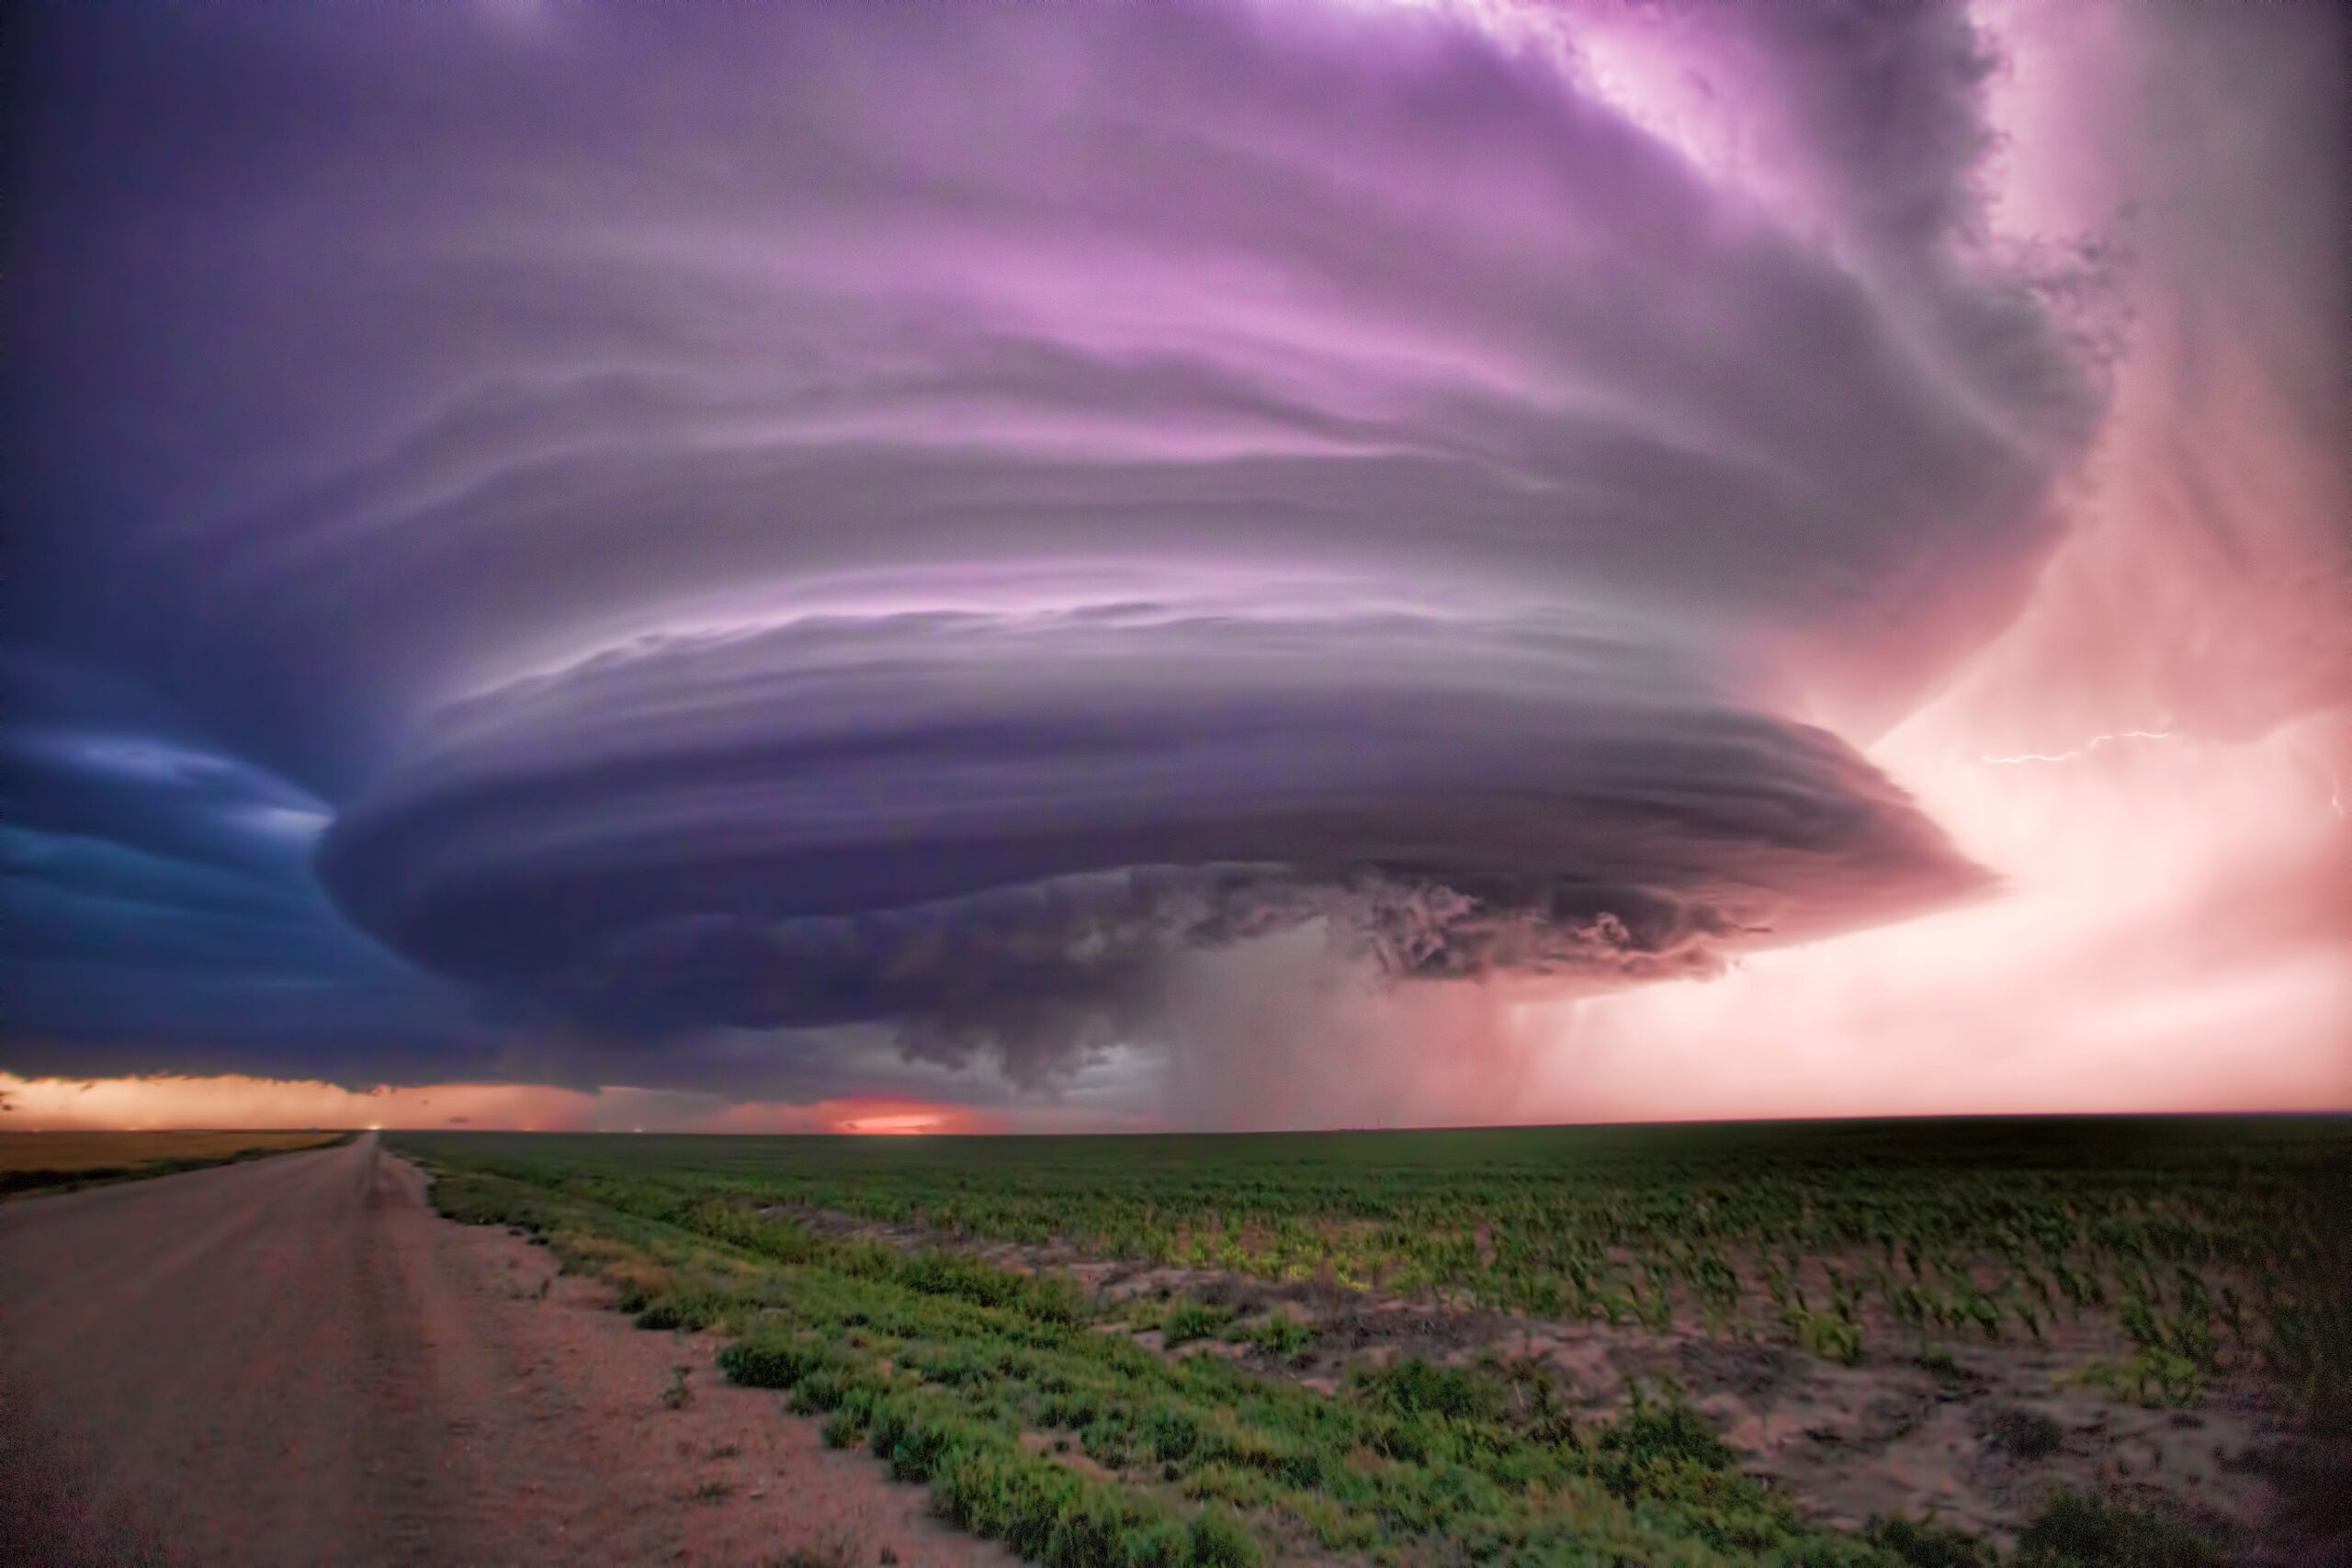 A supercell thunderstorm hovers over a newly planted corn field in Wichita County Kansas